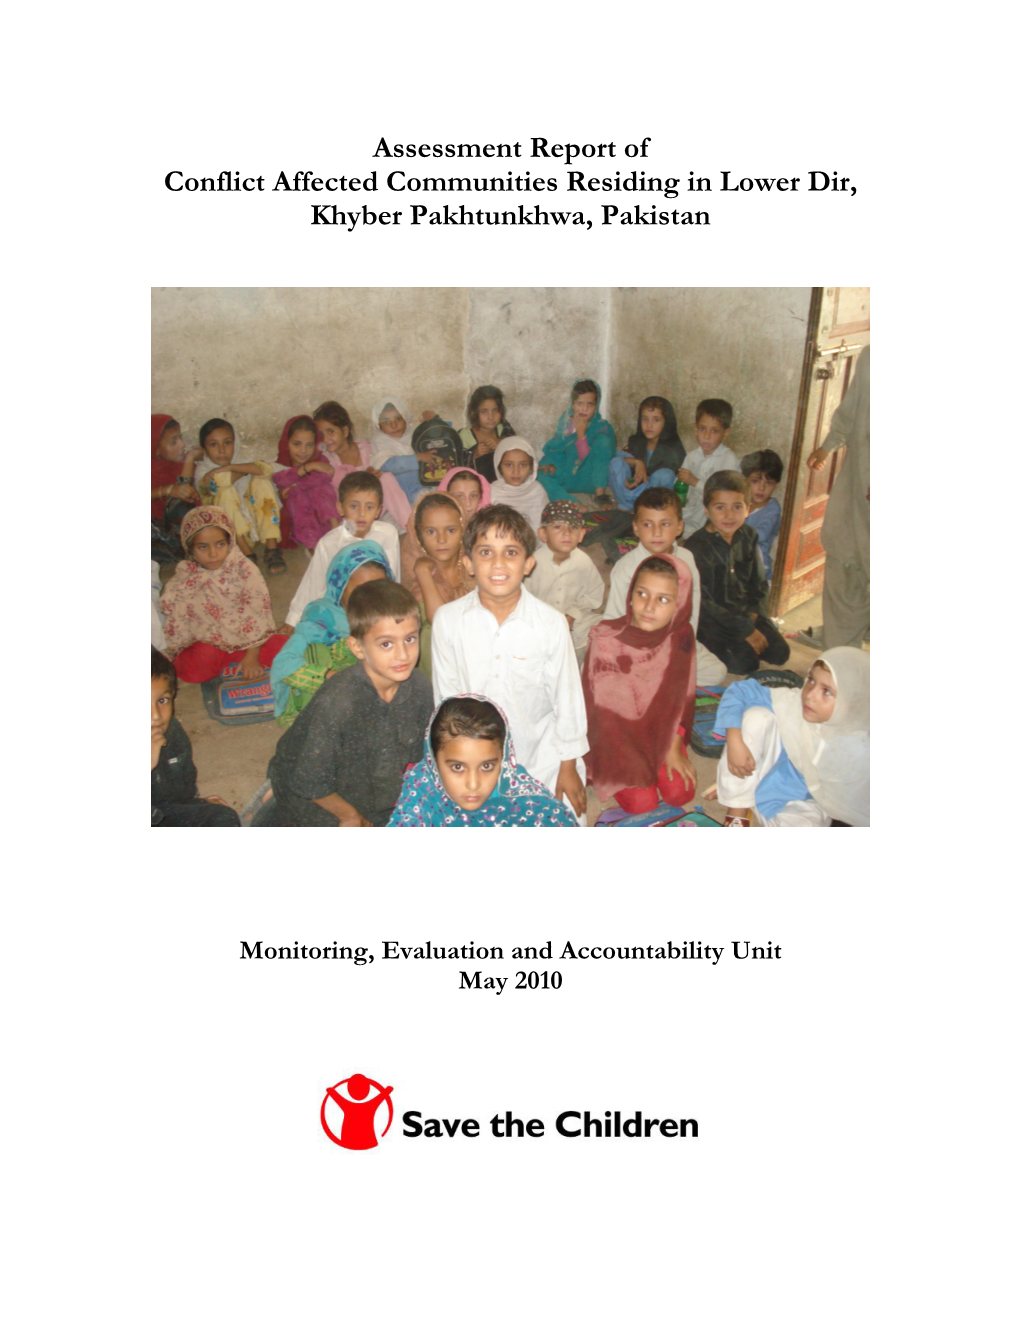 Assessment Report of Conflict Affected Communities Residing in Lower Dir, Khyber Pakhtunkhwa, Pakistan